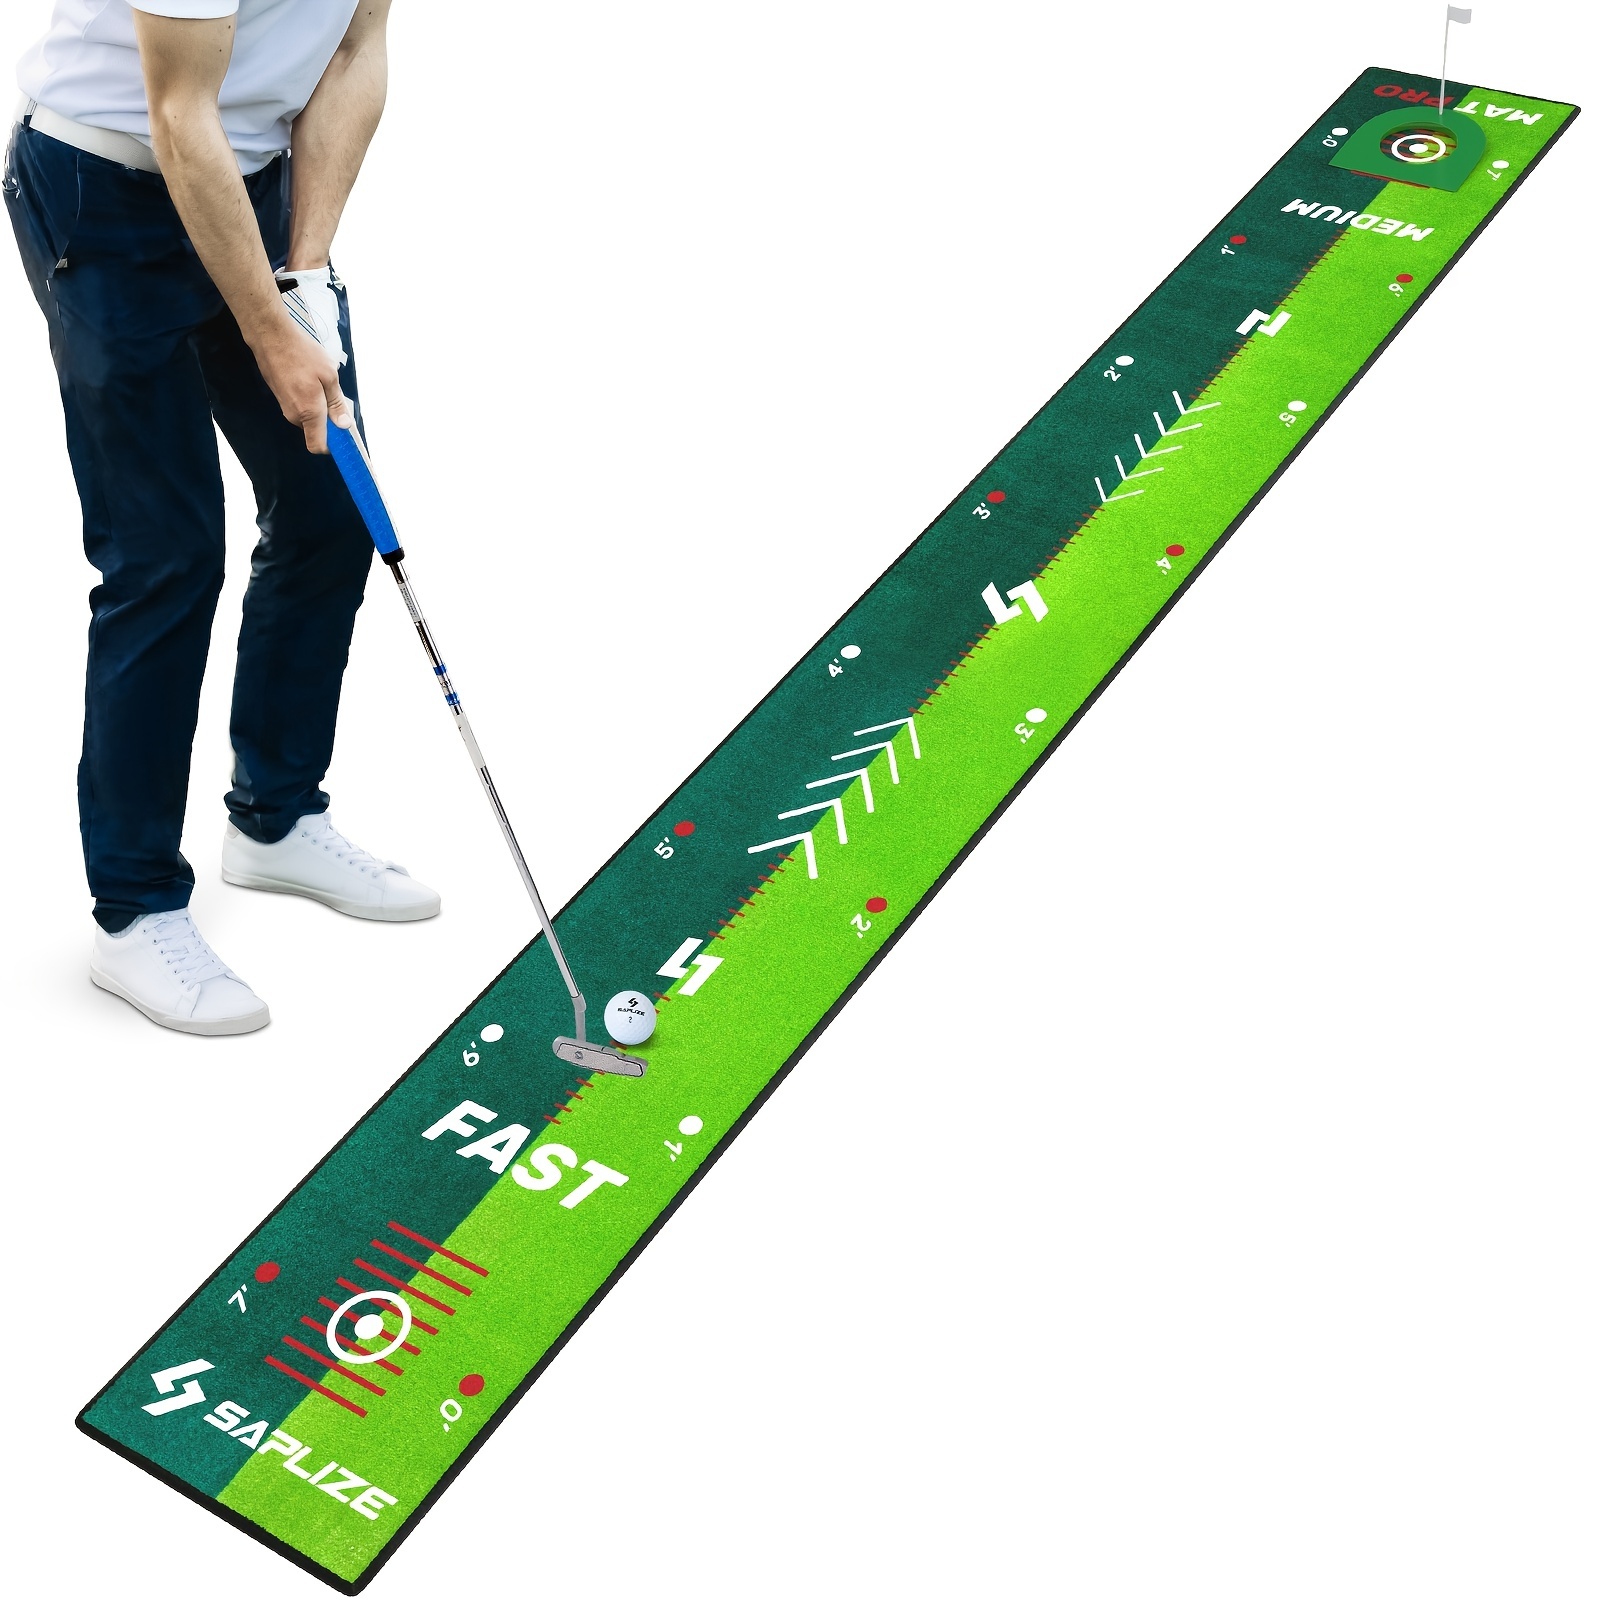 Finds: Saplize Two Speed Putting Mat Review